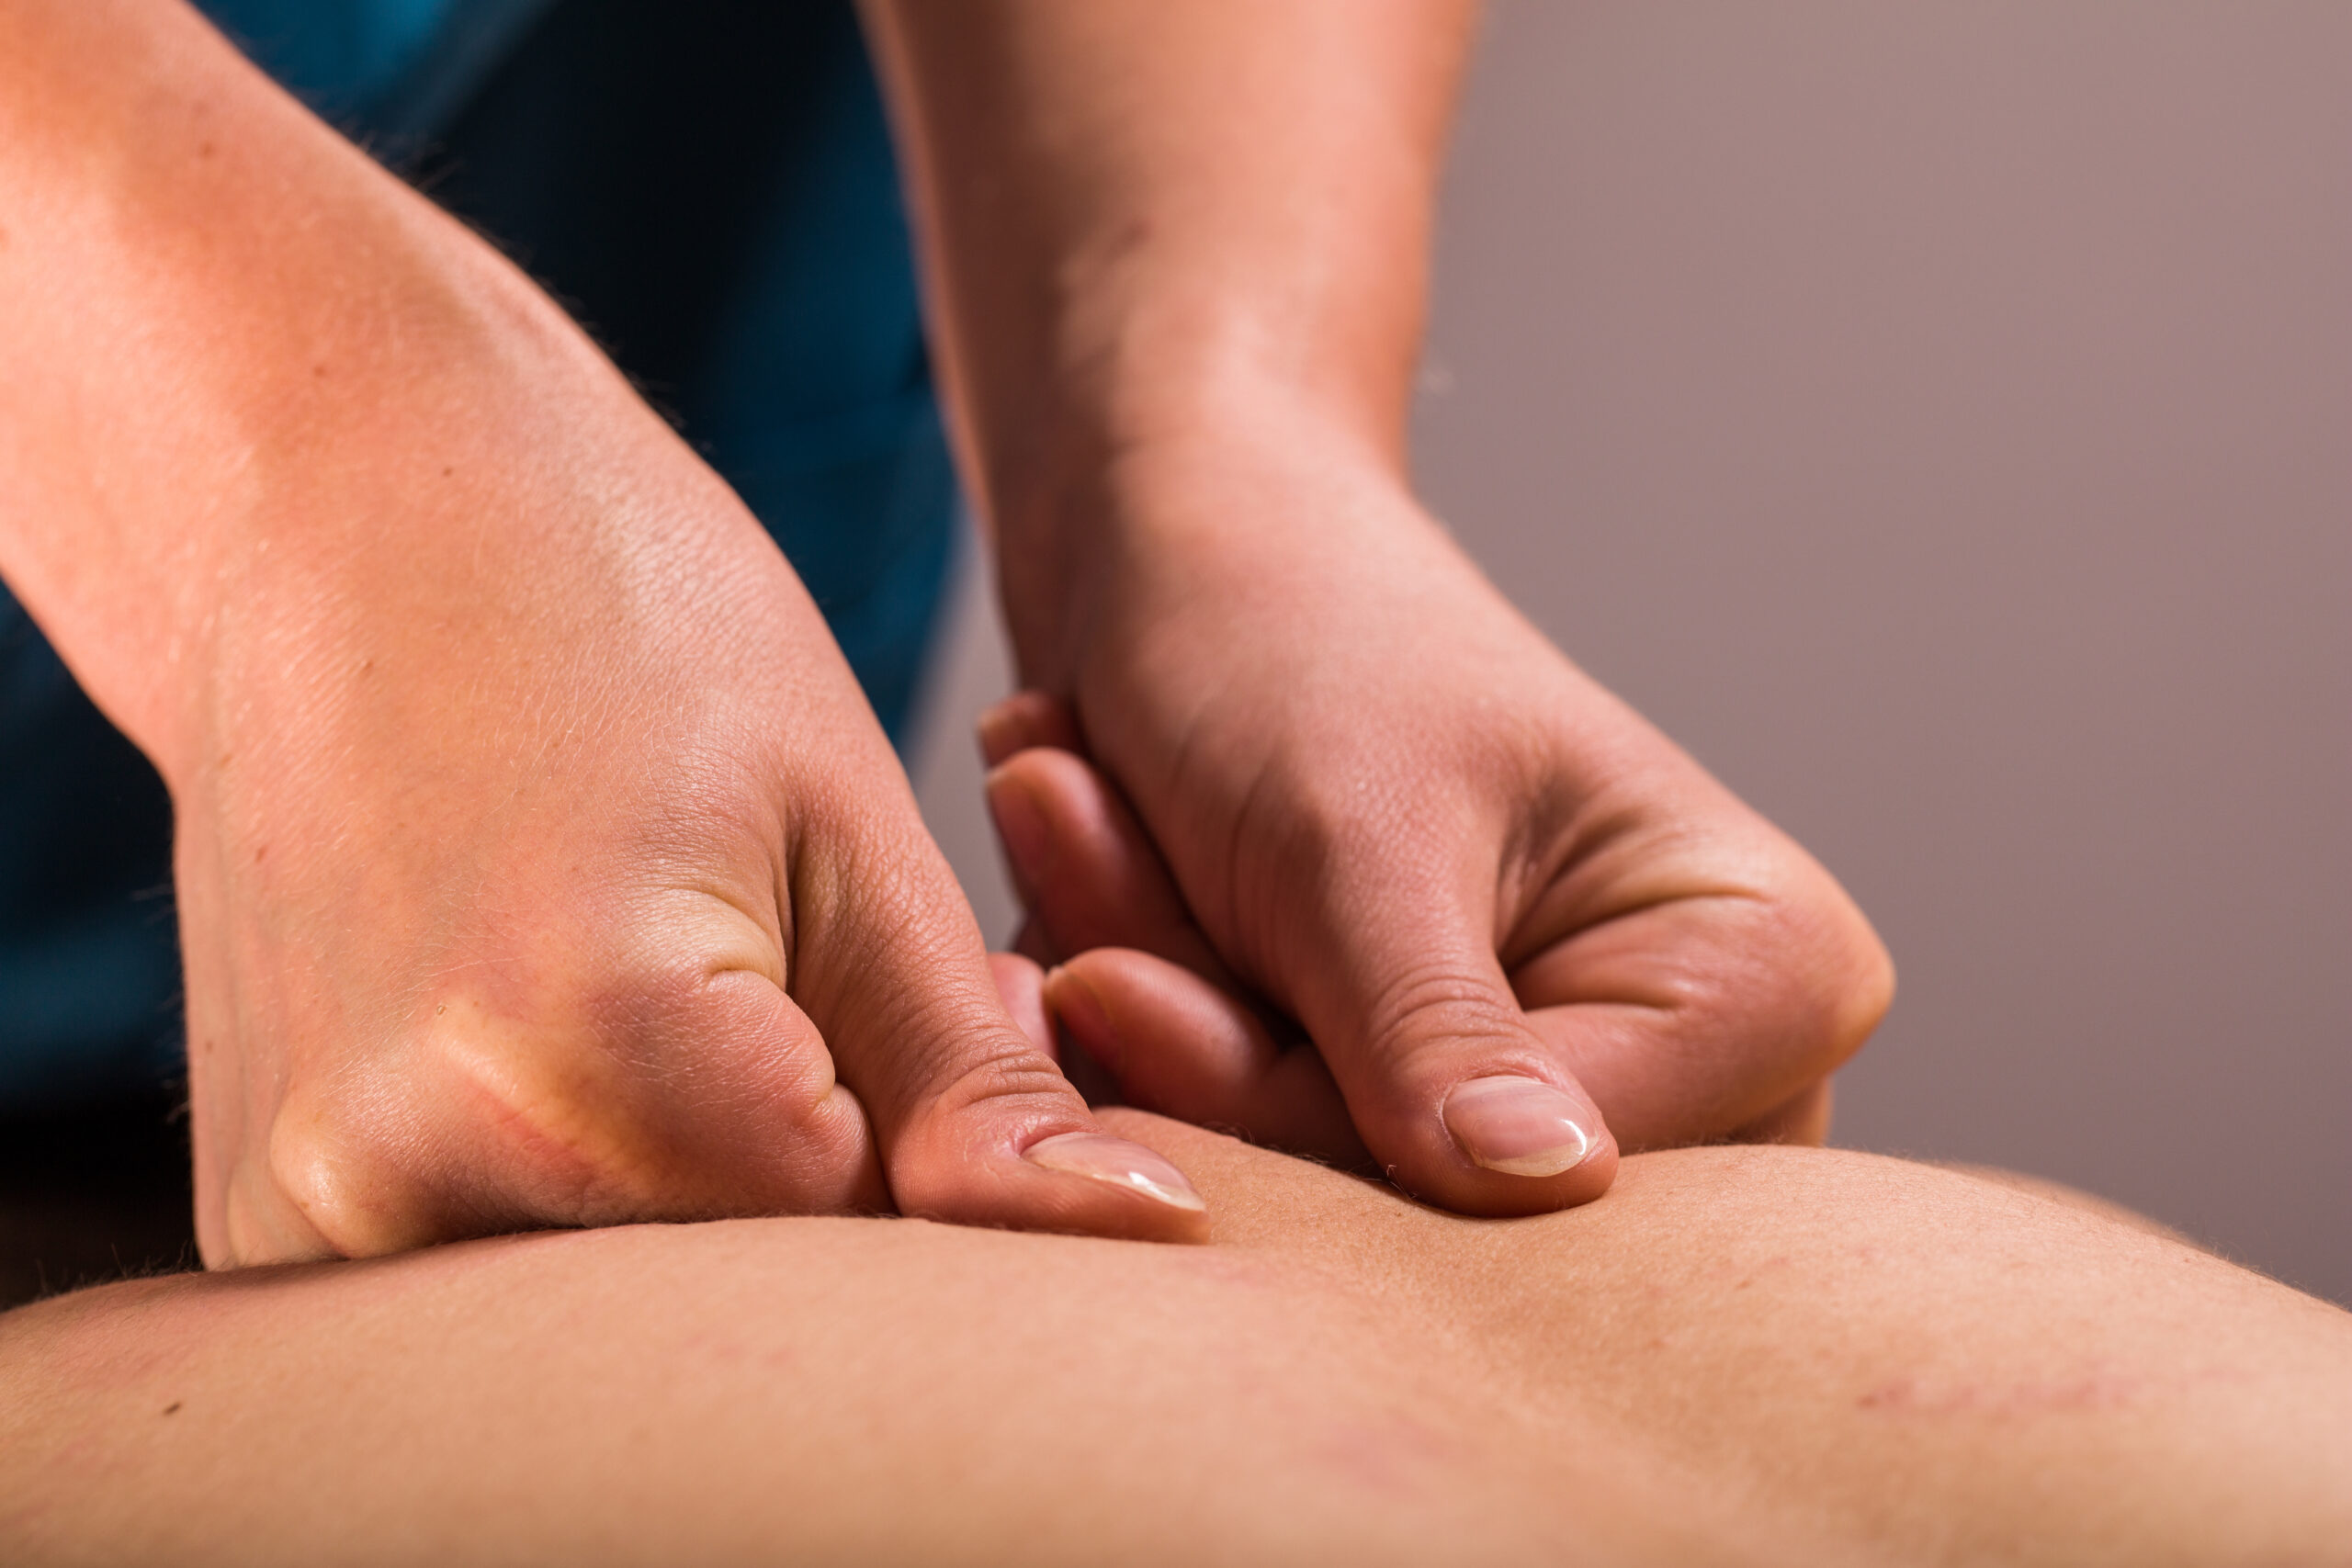 A close-up of someone receiving a deep tissue massage as part of their massage therapy treatment.